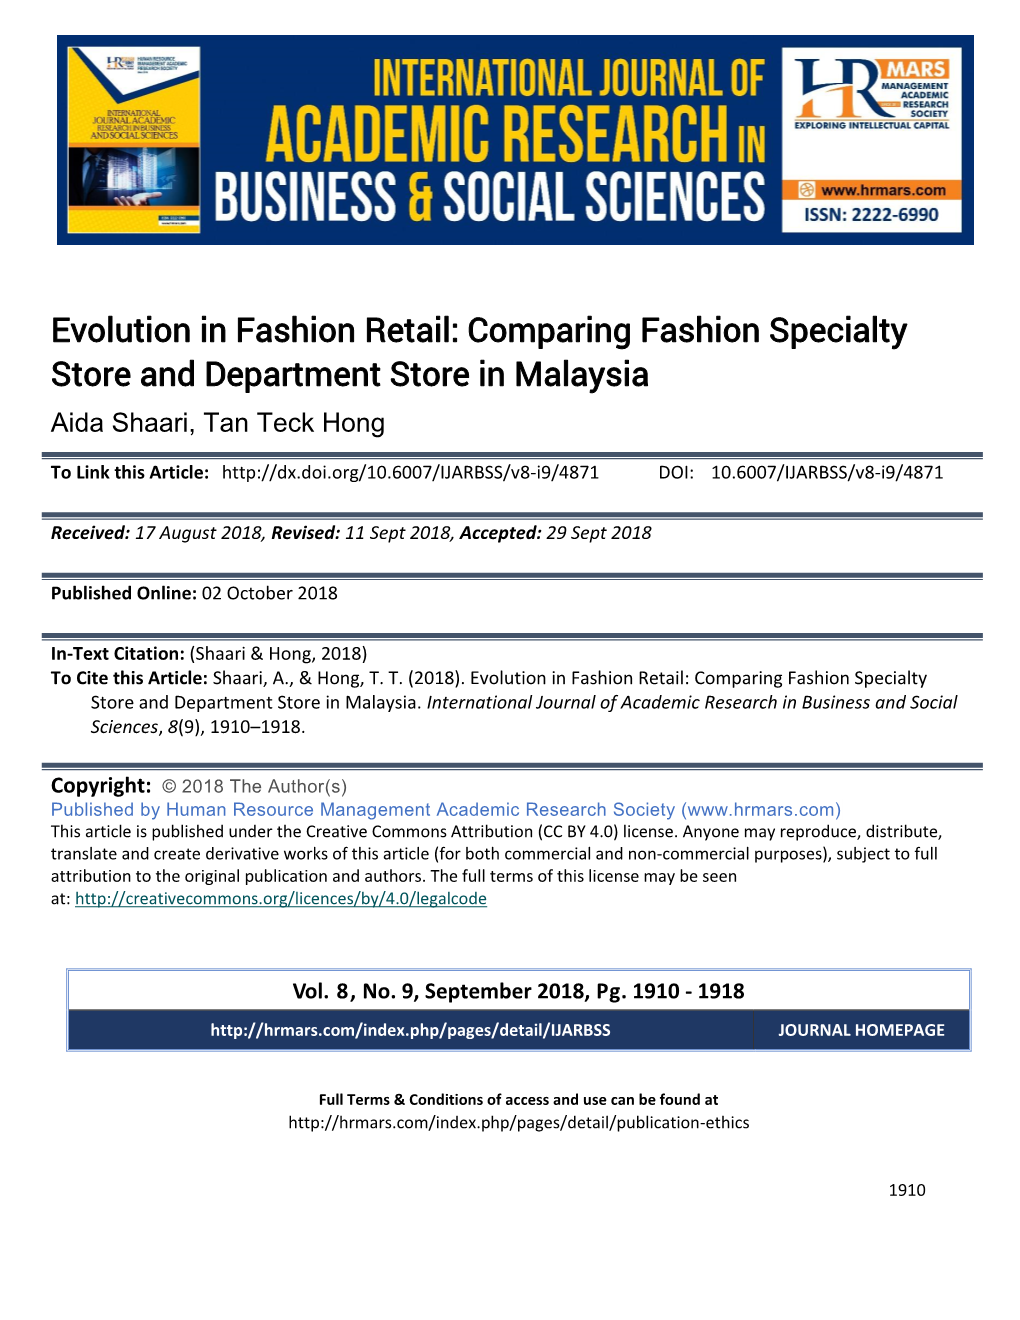 Comparing Fashion Specialty Store and Department Store in Malaysia